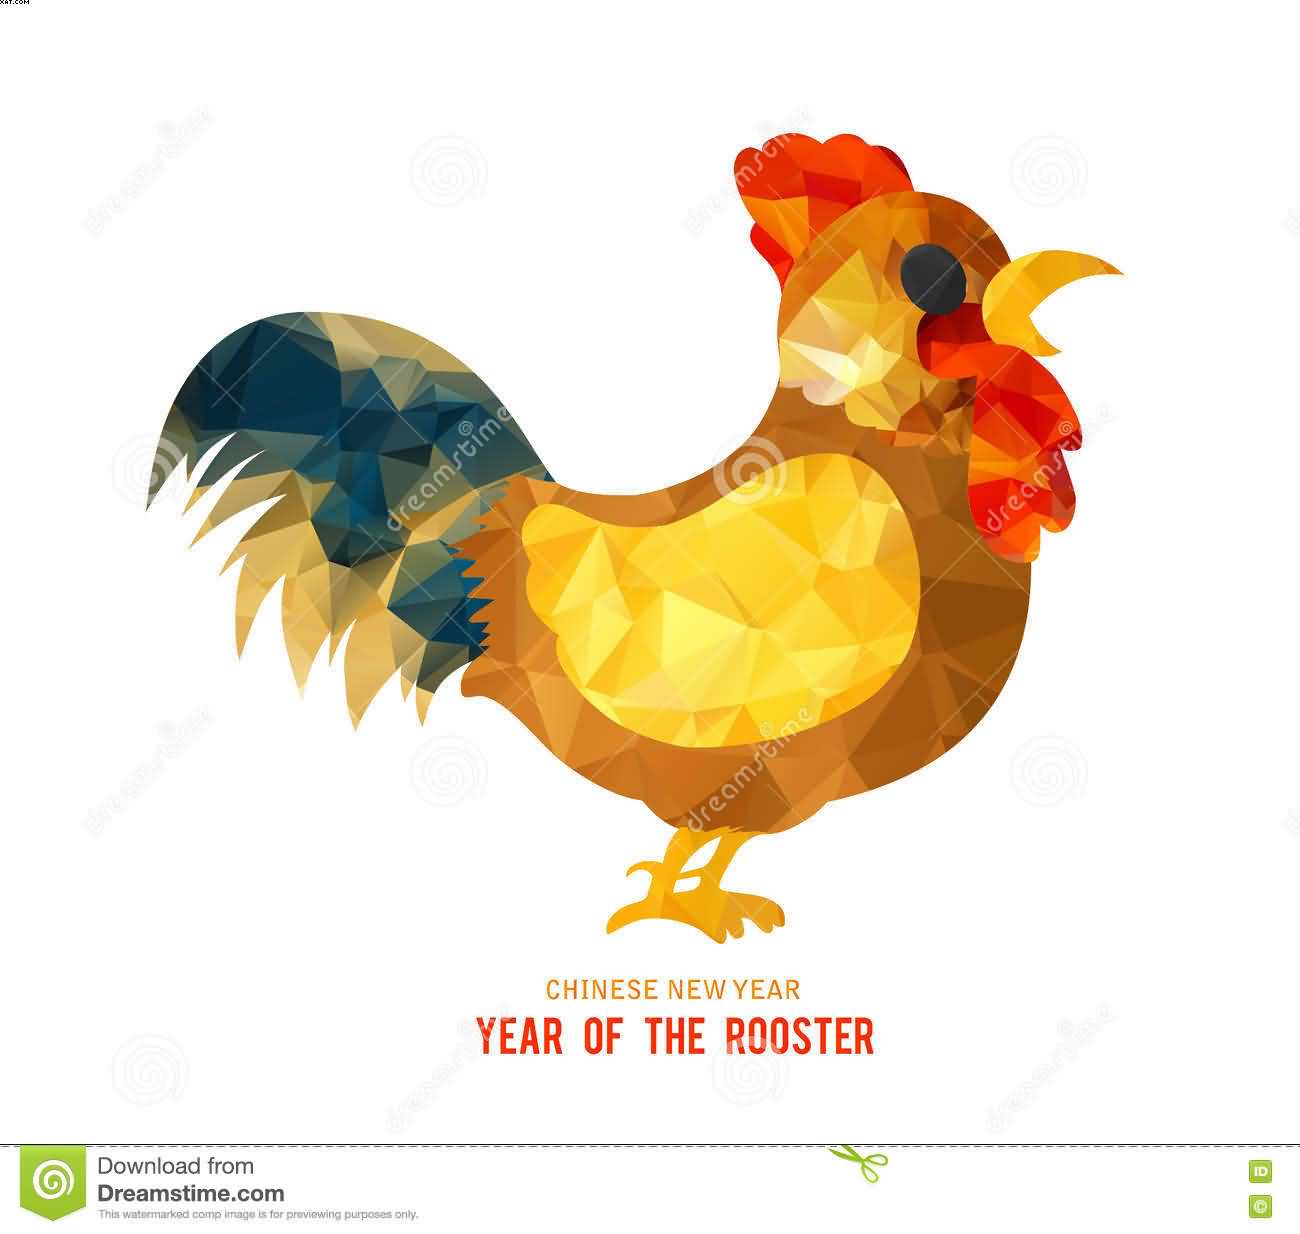 Chinese New Year Year of rooster greeting card